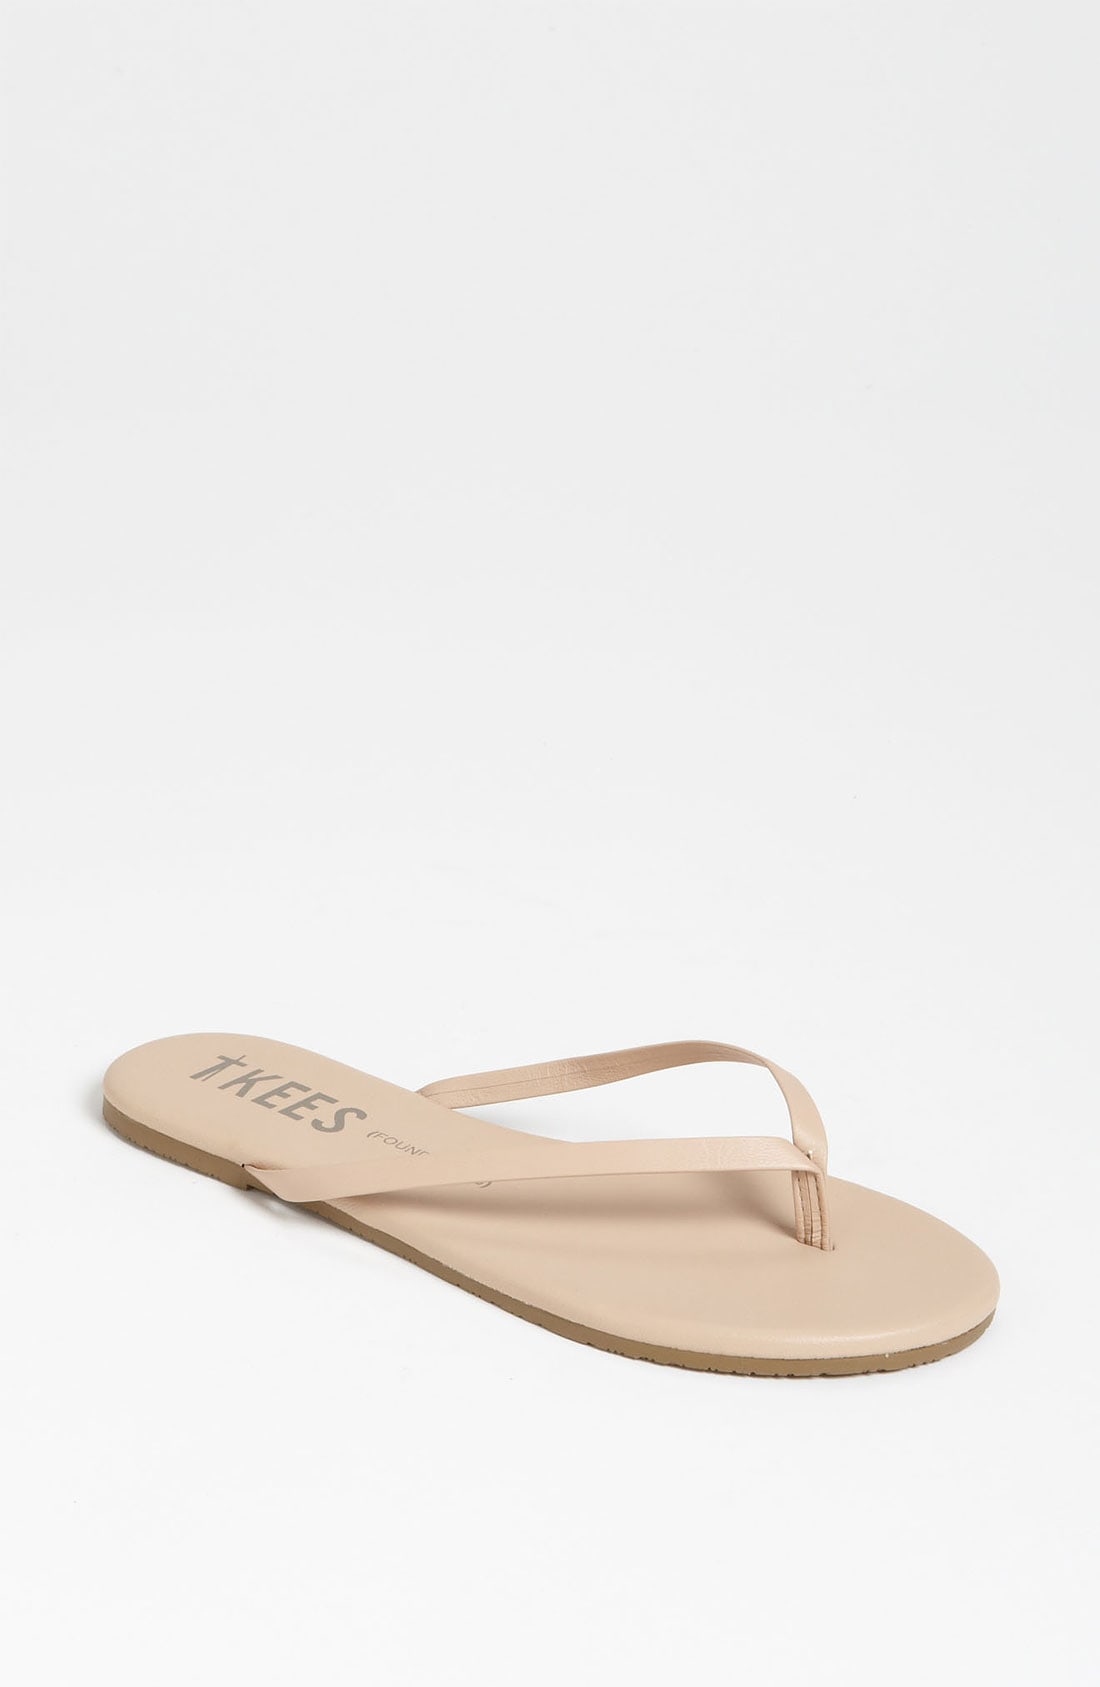 TKEES 'Foundations' Flip Flop